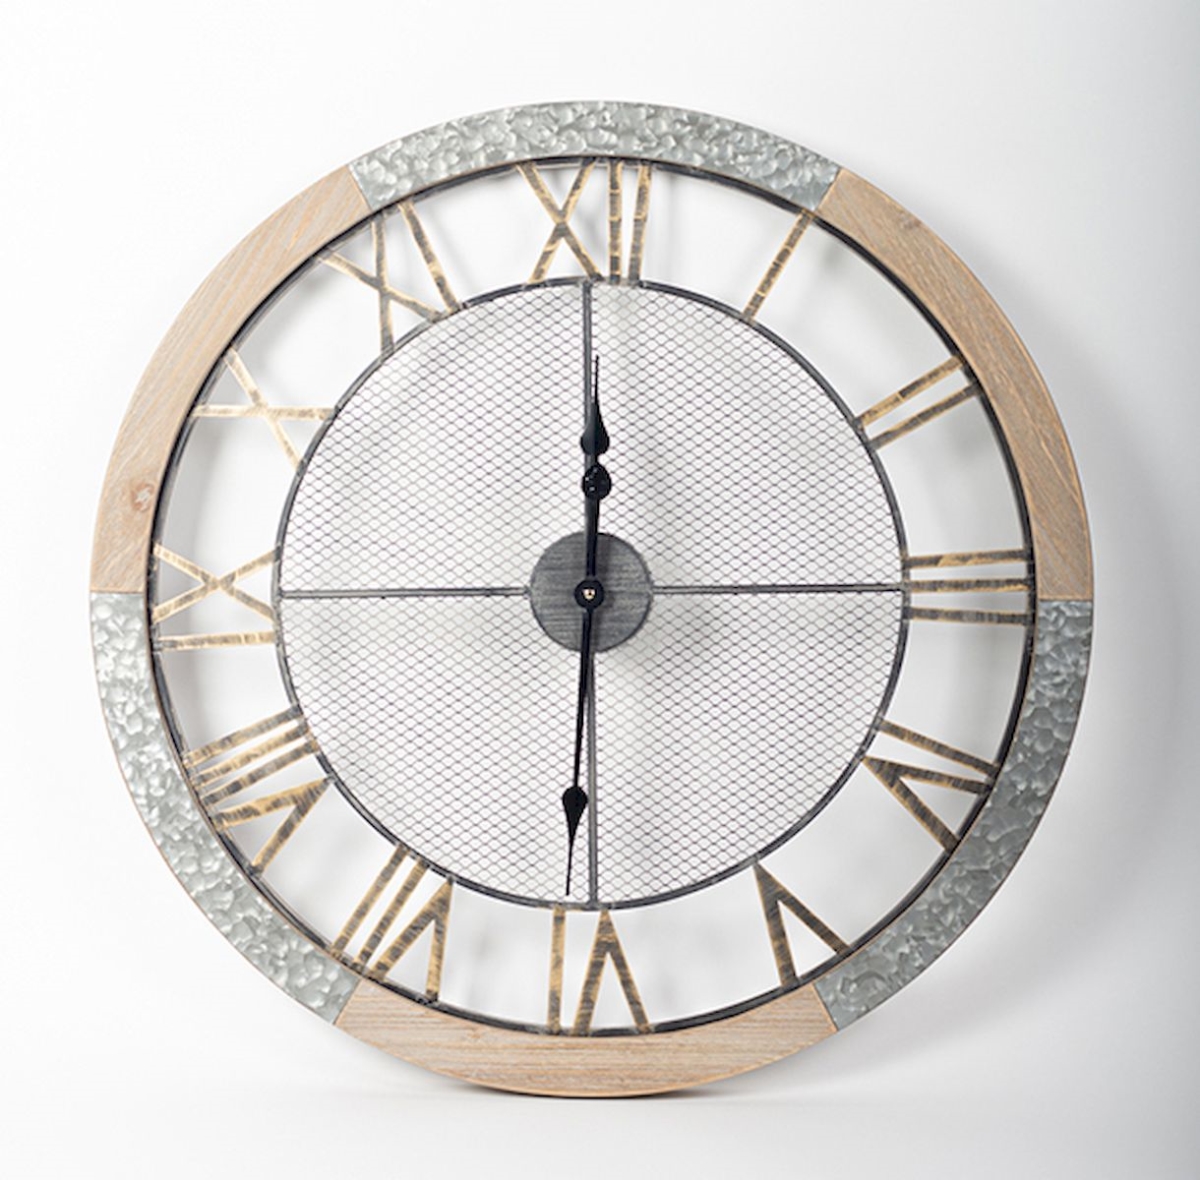 Picture of Forpost FP-FHB-095 Wood & Metal Wall Clock